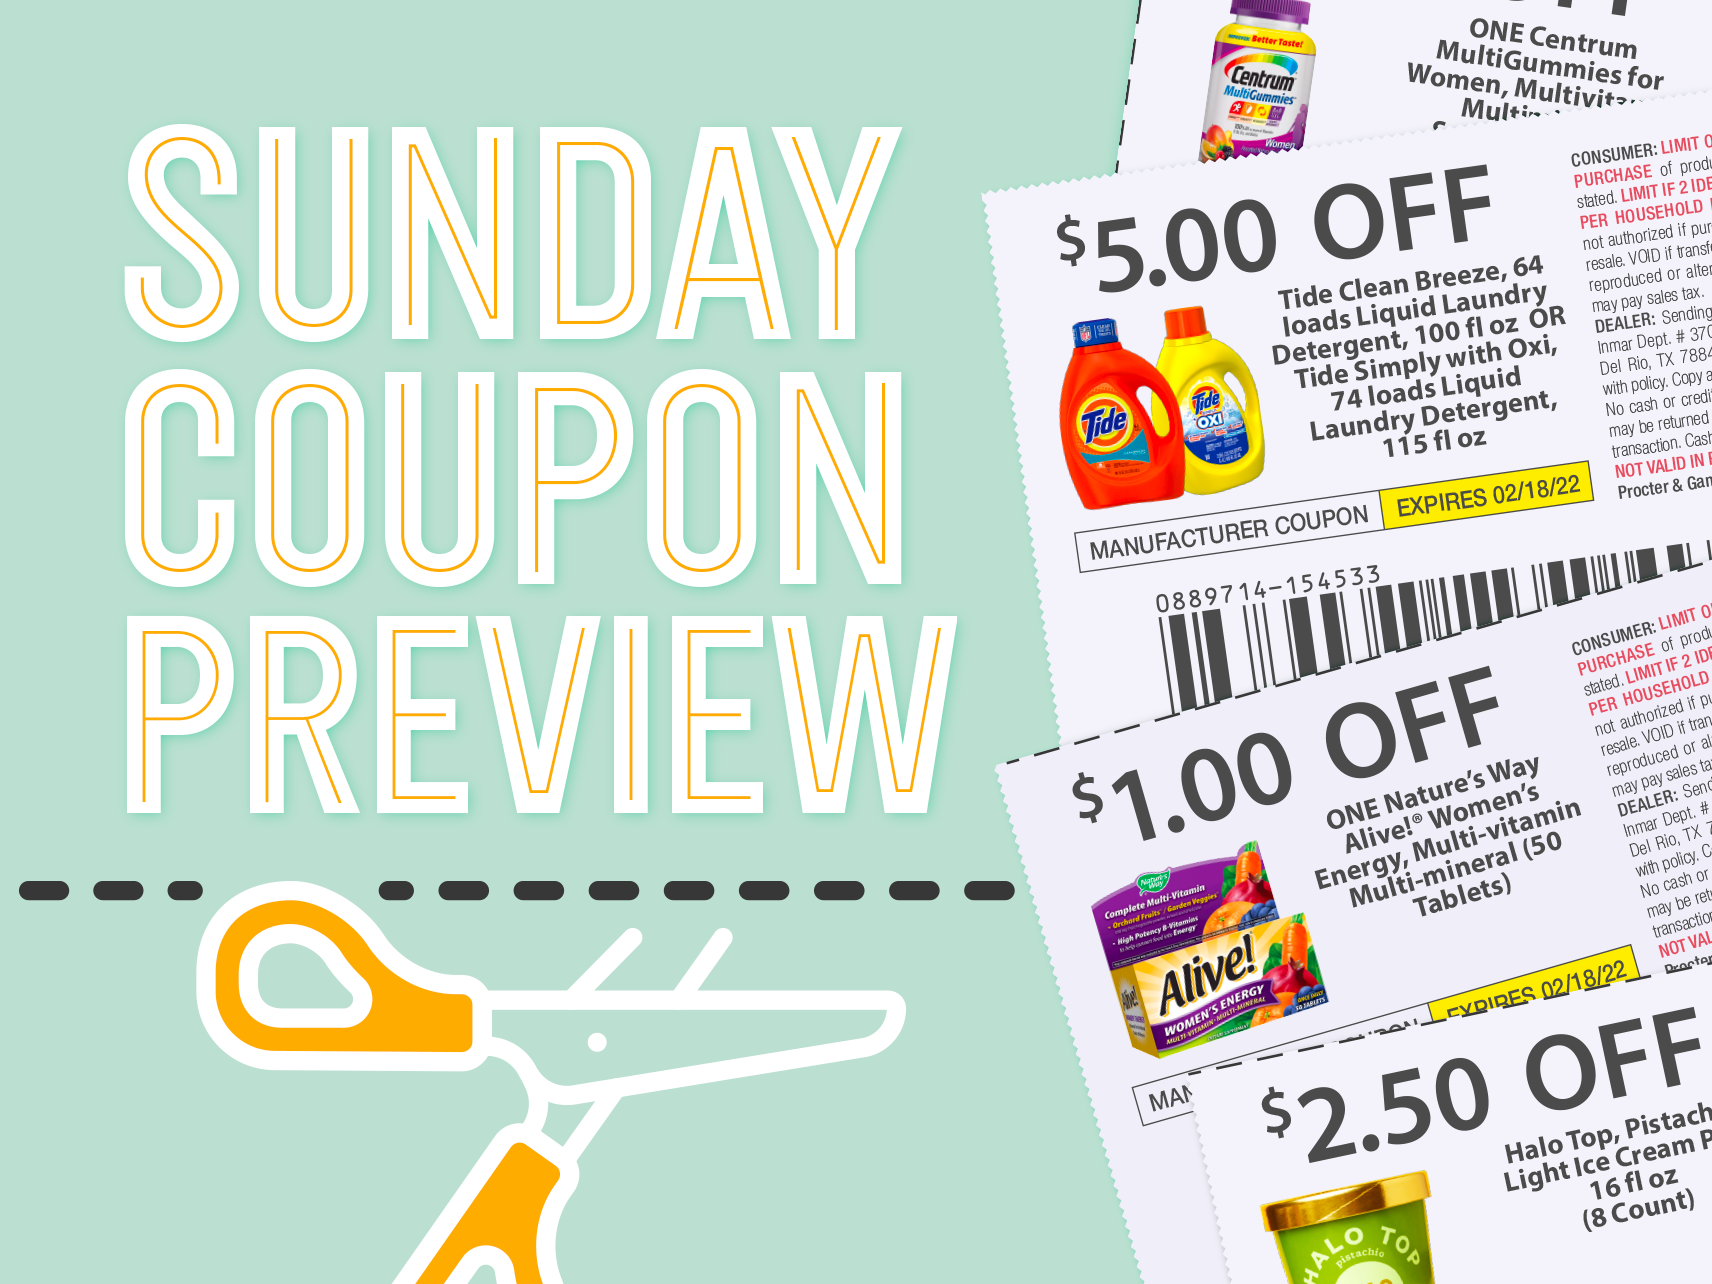 Sunday Coupon Preview For 1/29 – Two Inserts